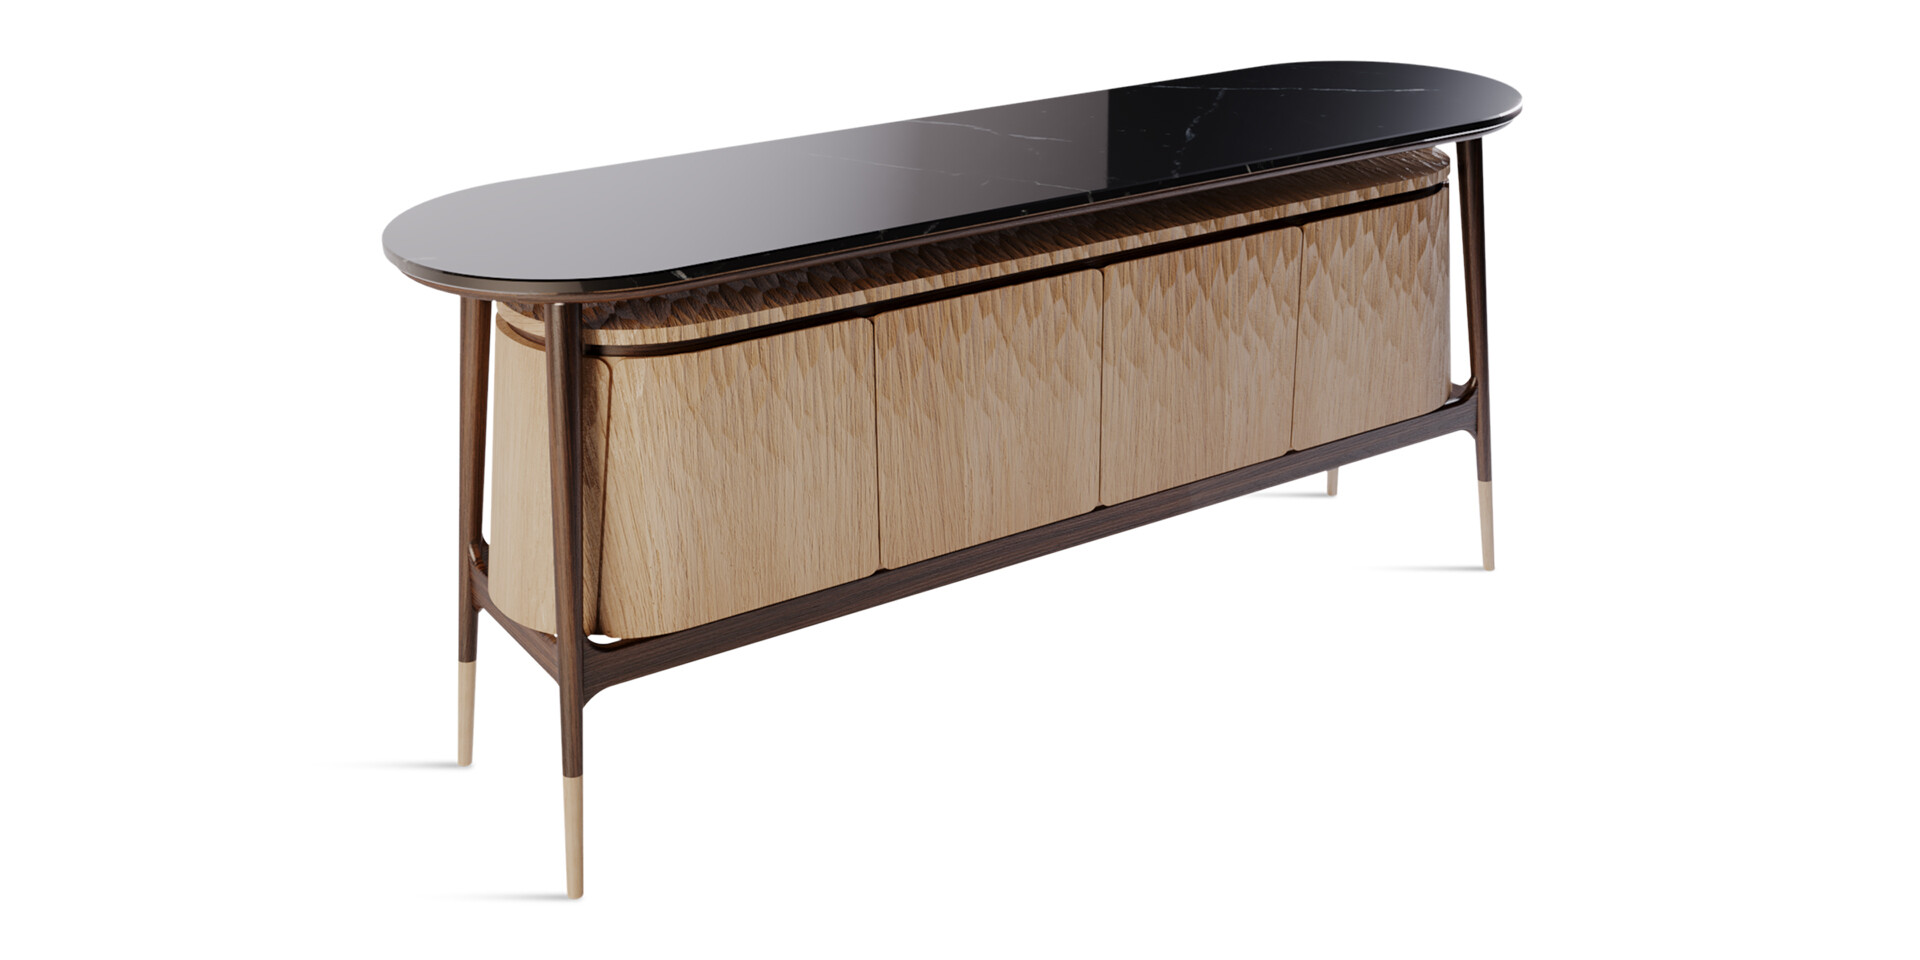 AT TURAIF SIDEBOARD - Top Front Side View - ALMA de LUCE